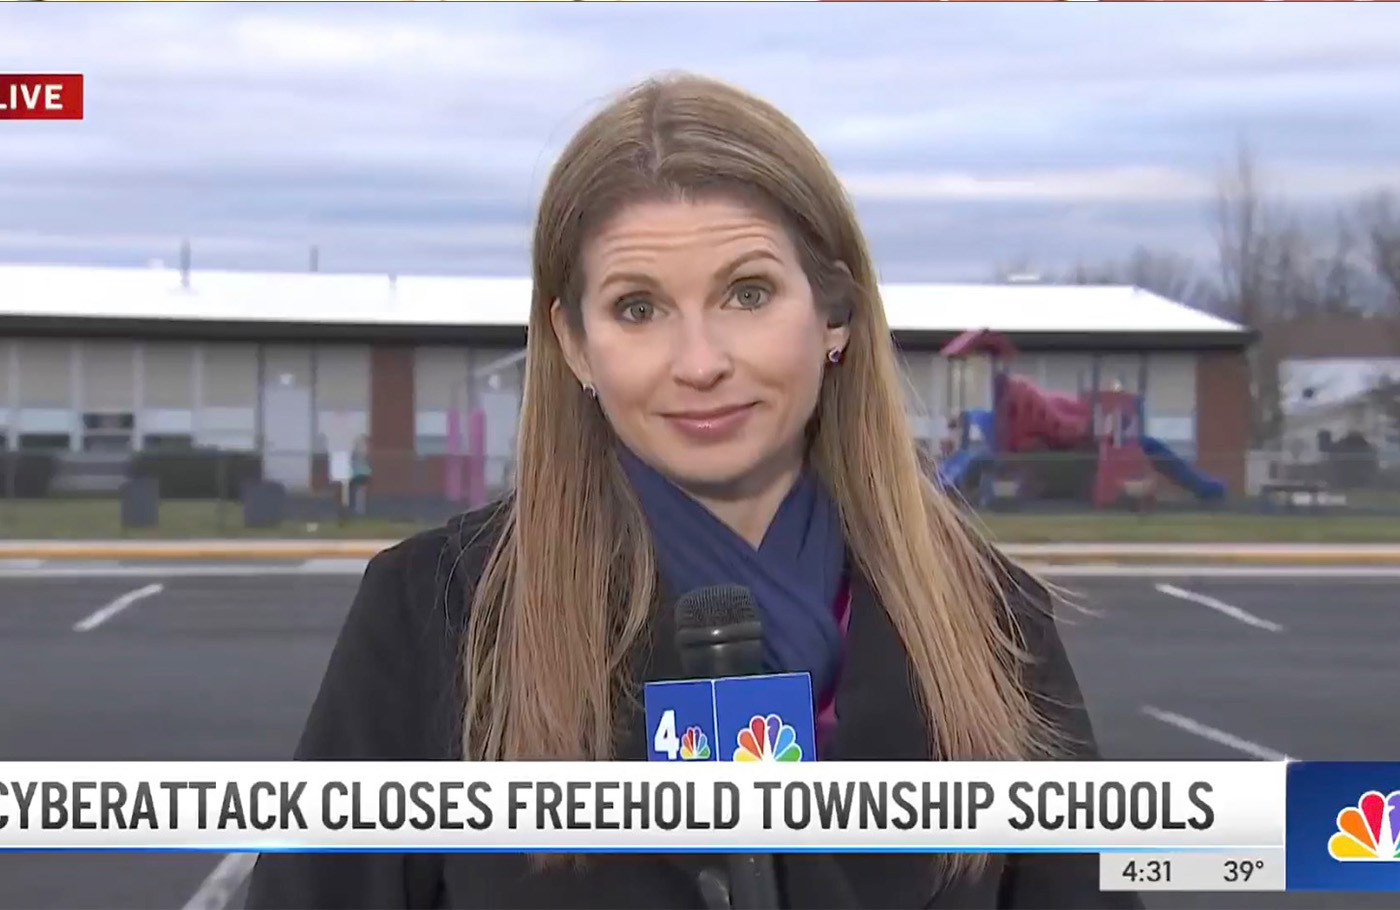 Featured image for the  Cyberattack closes Freehold Township schools page